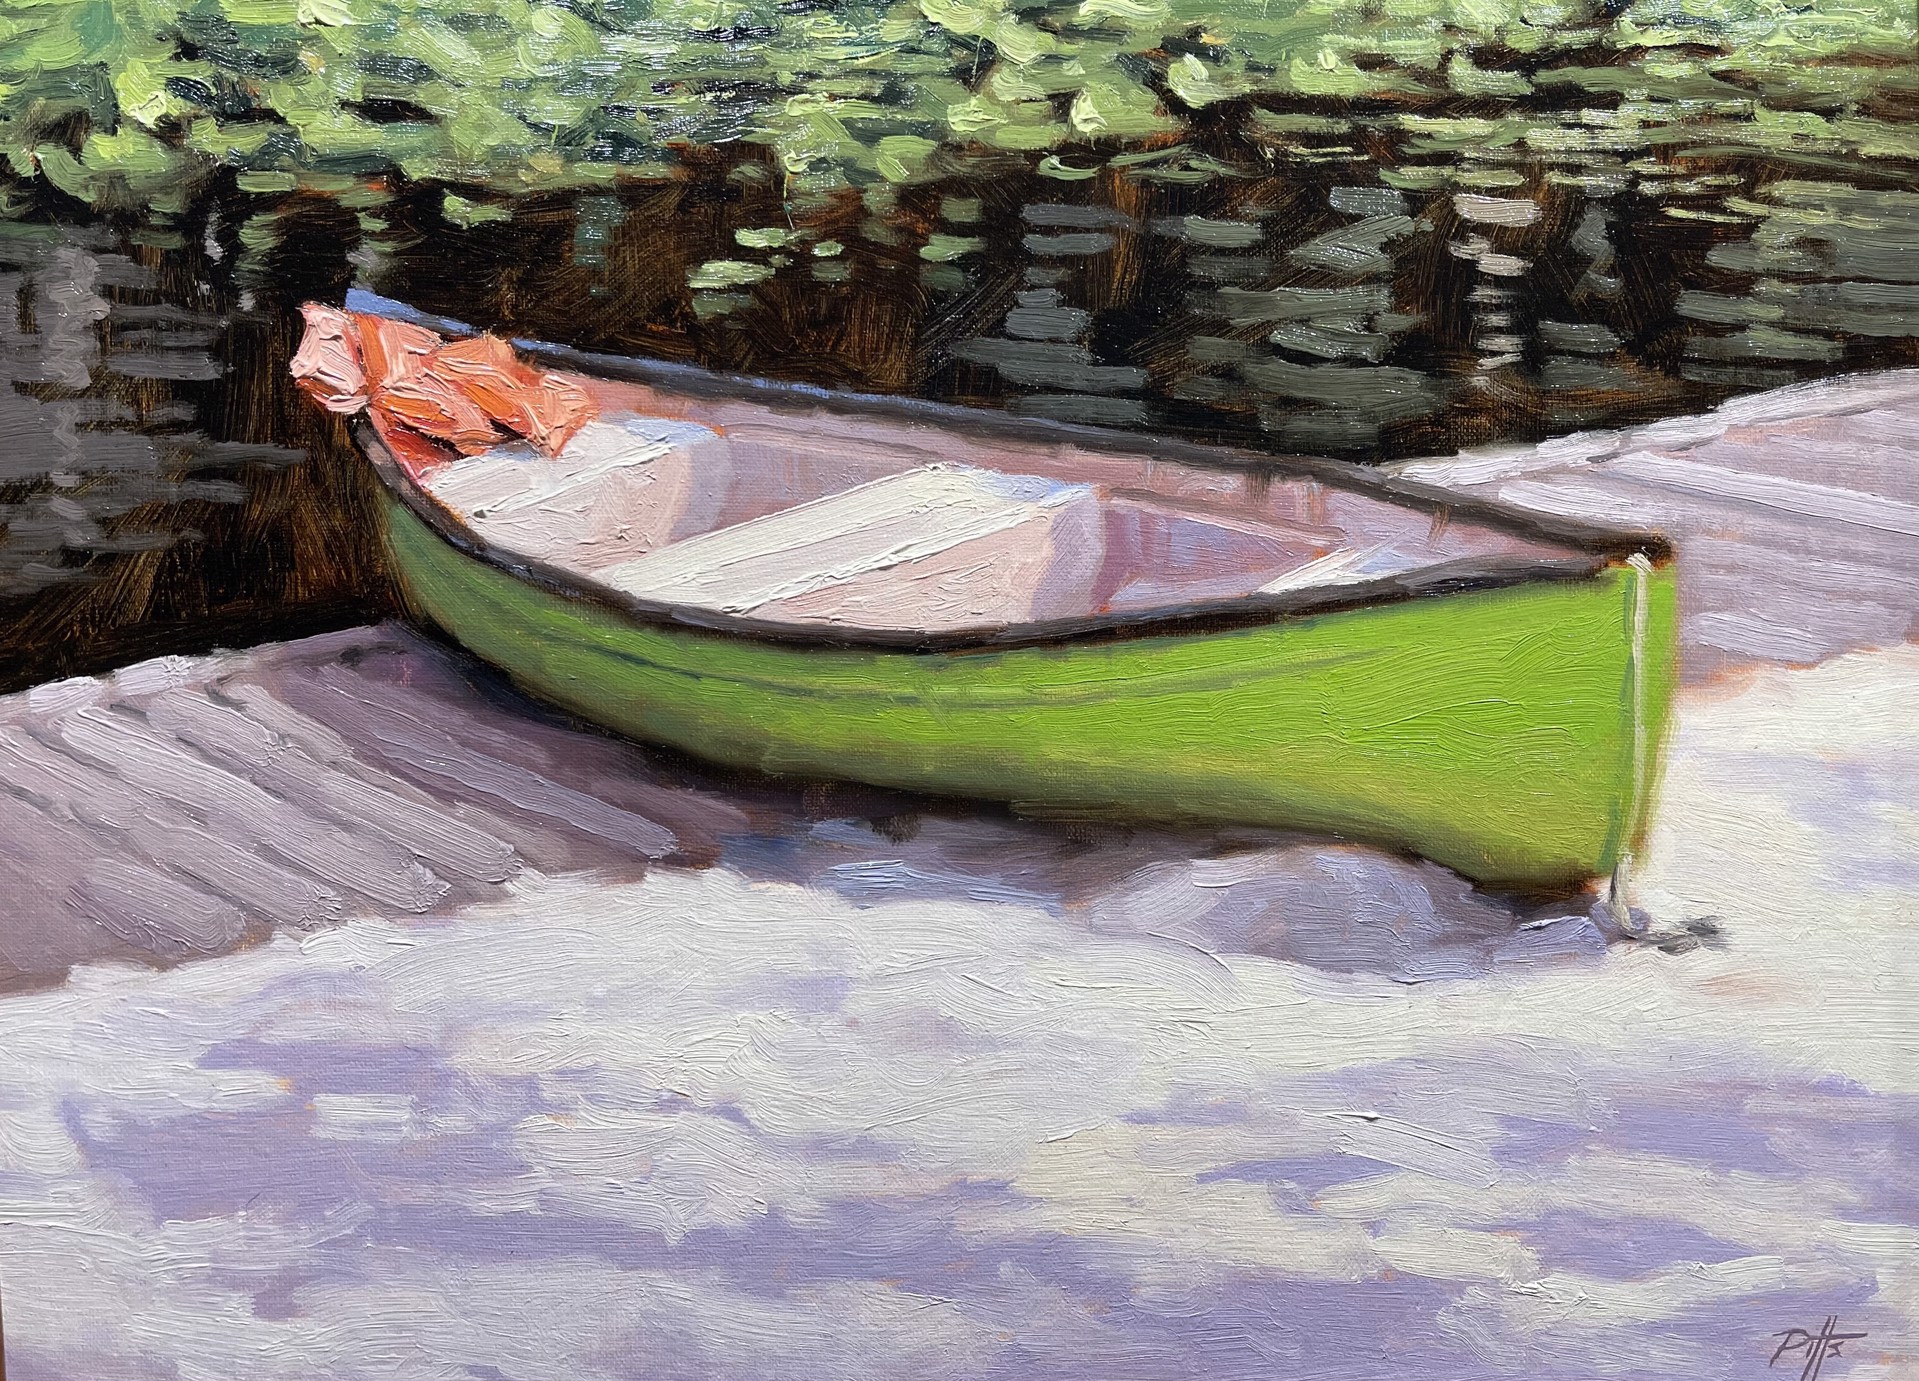 The Green Canoe - SOLD by Randy Pitts